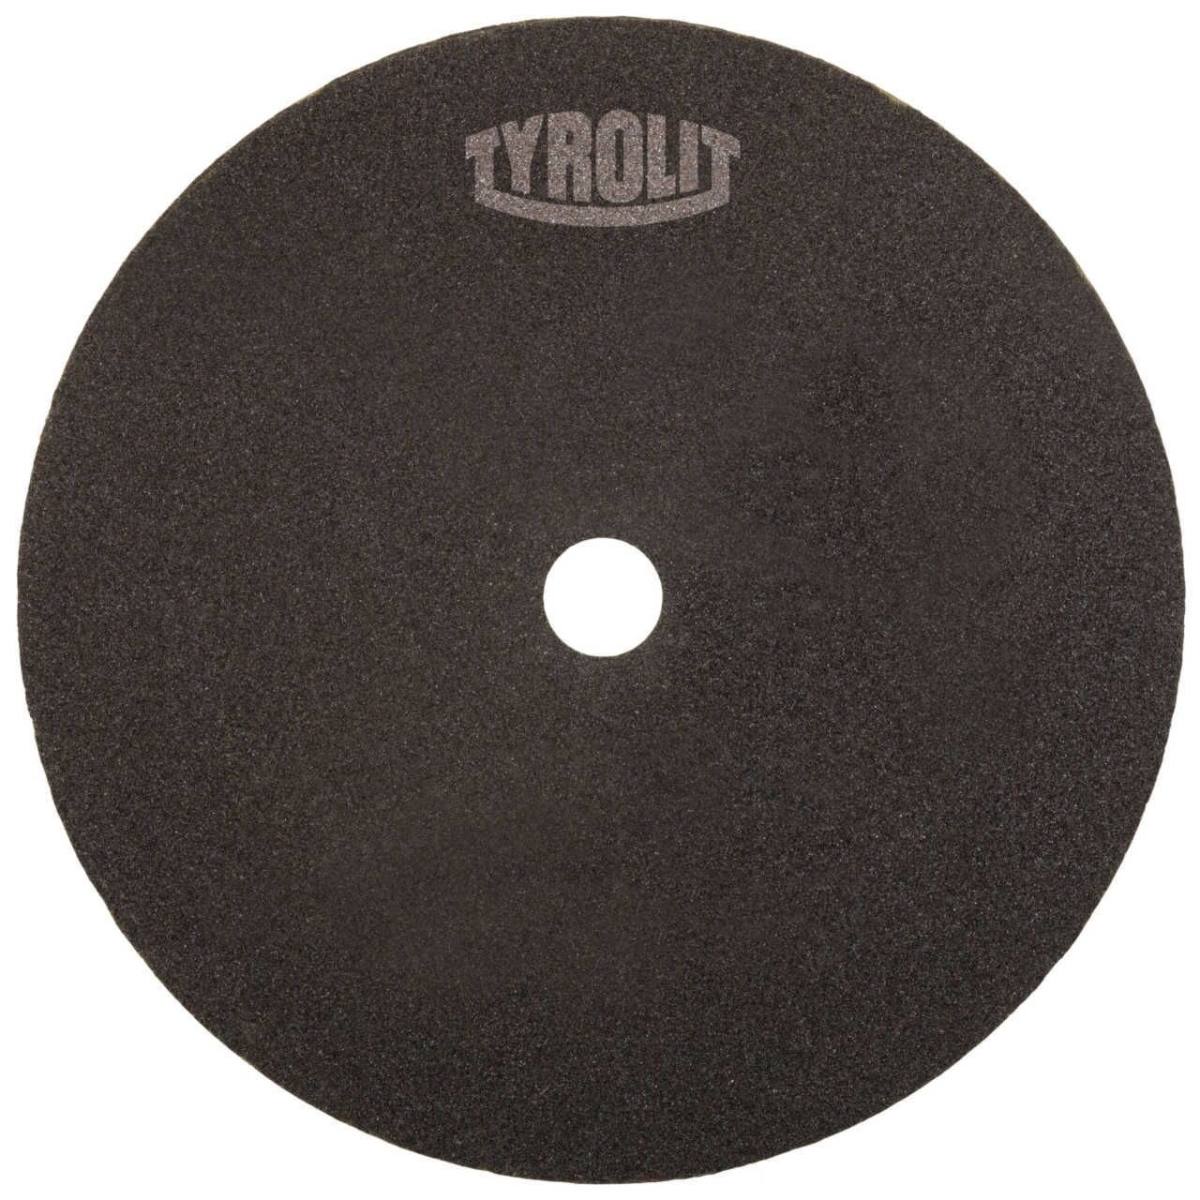 TYROLIT cut-off wheel for cutting and saw sharpening DxDxH 175x3x51 For steel and HSS, shape: 41N - straight version (non-woven cut-off wheel), Art. 607744